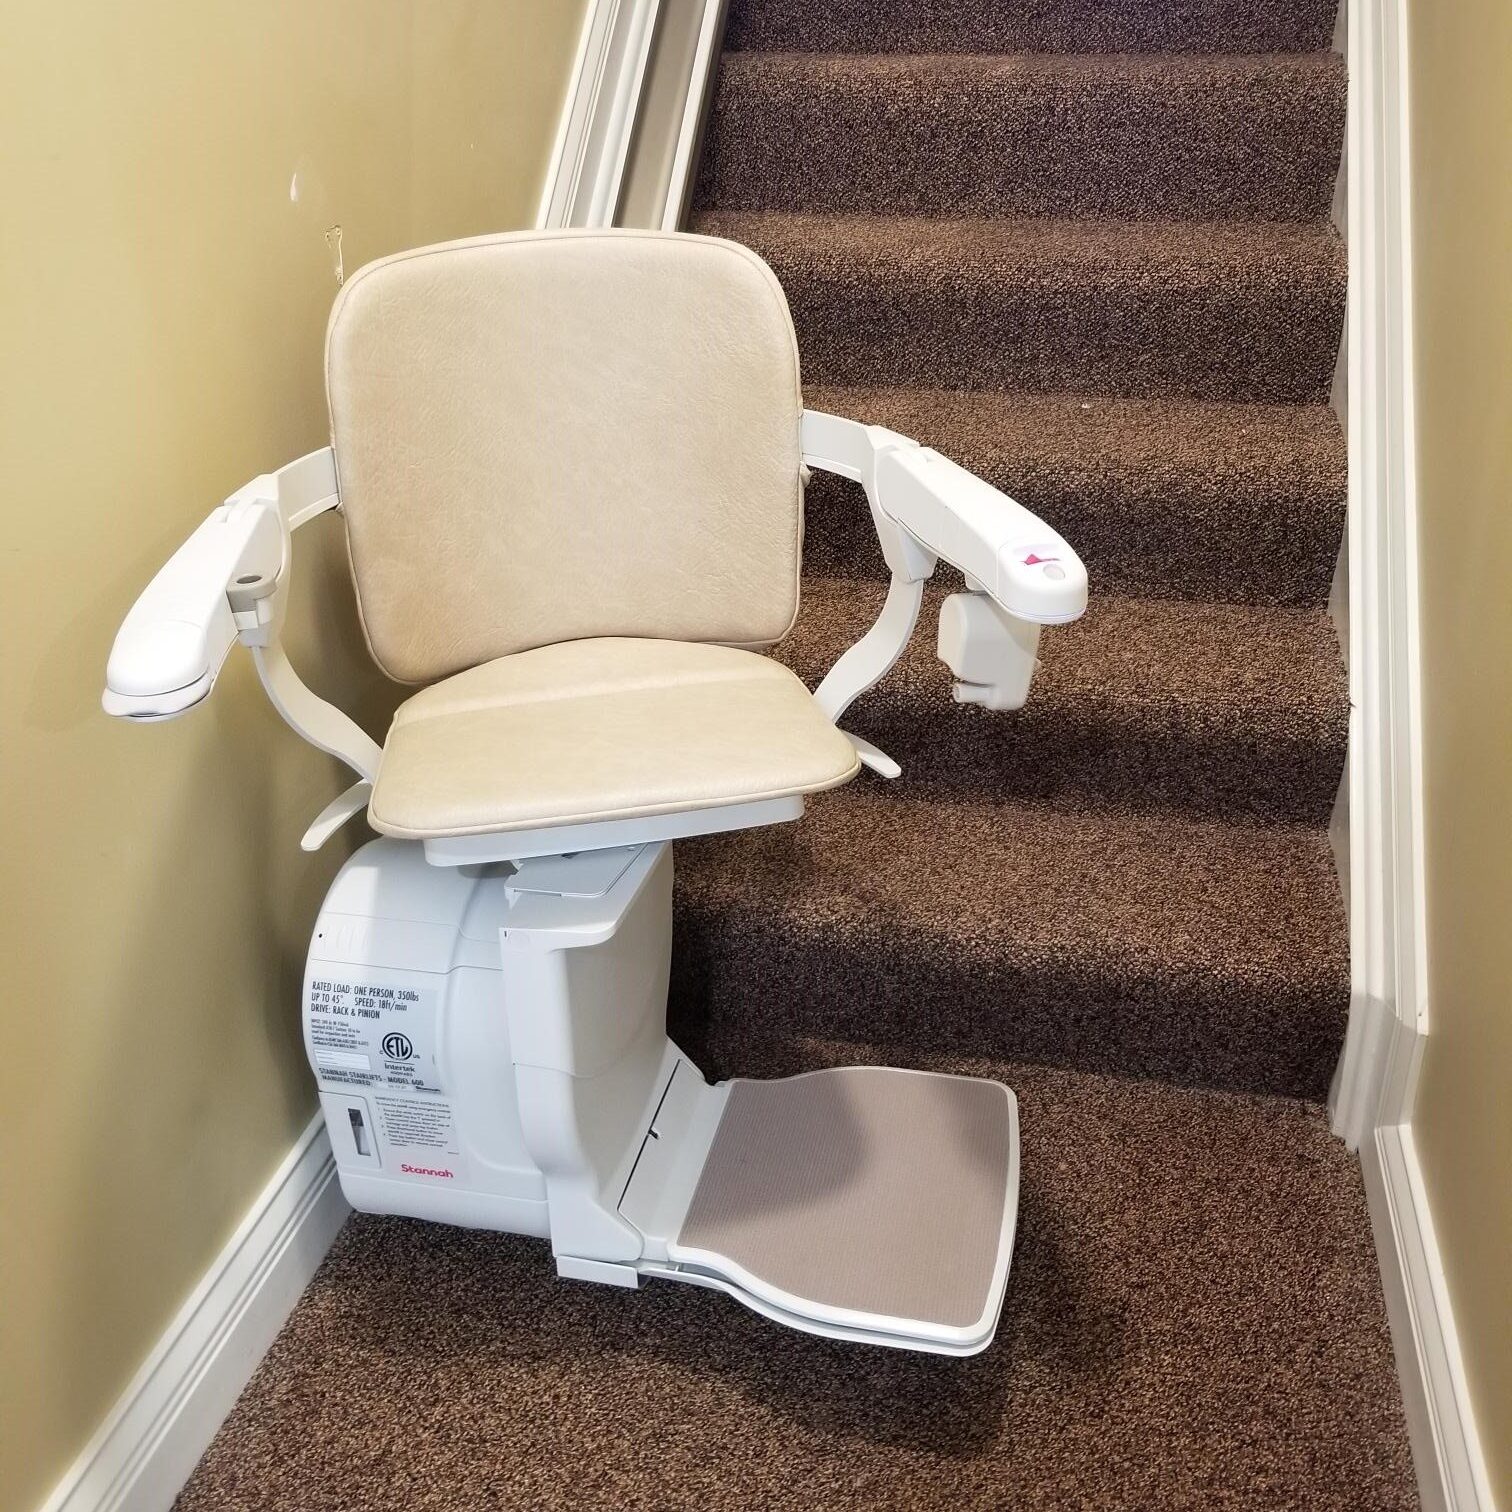 Stair Lift with power swivel at base of steps - Arrow Lift